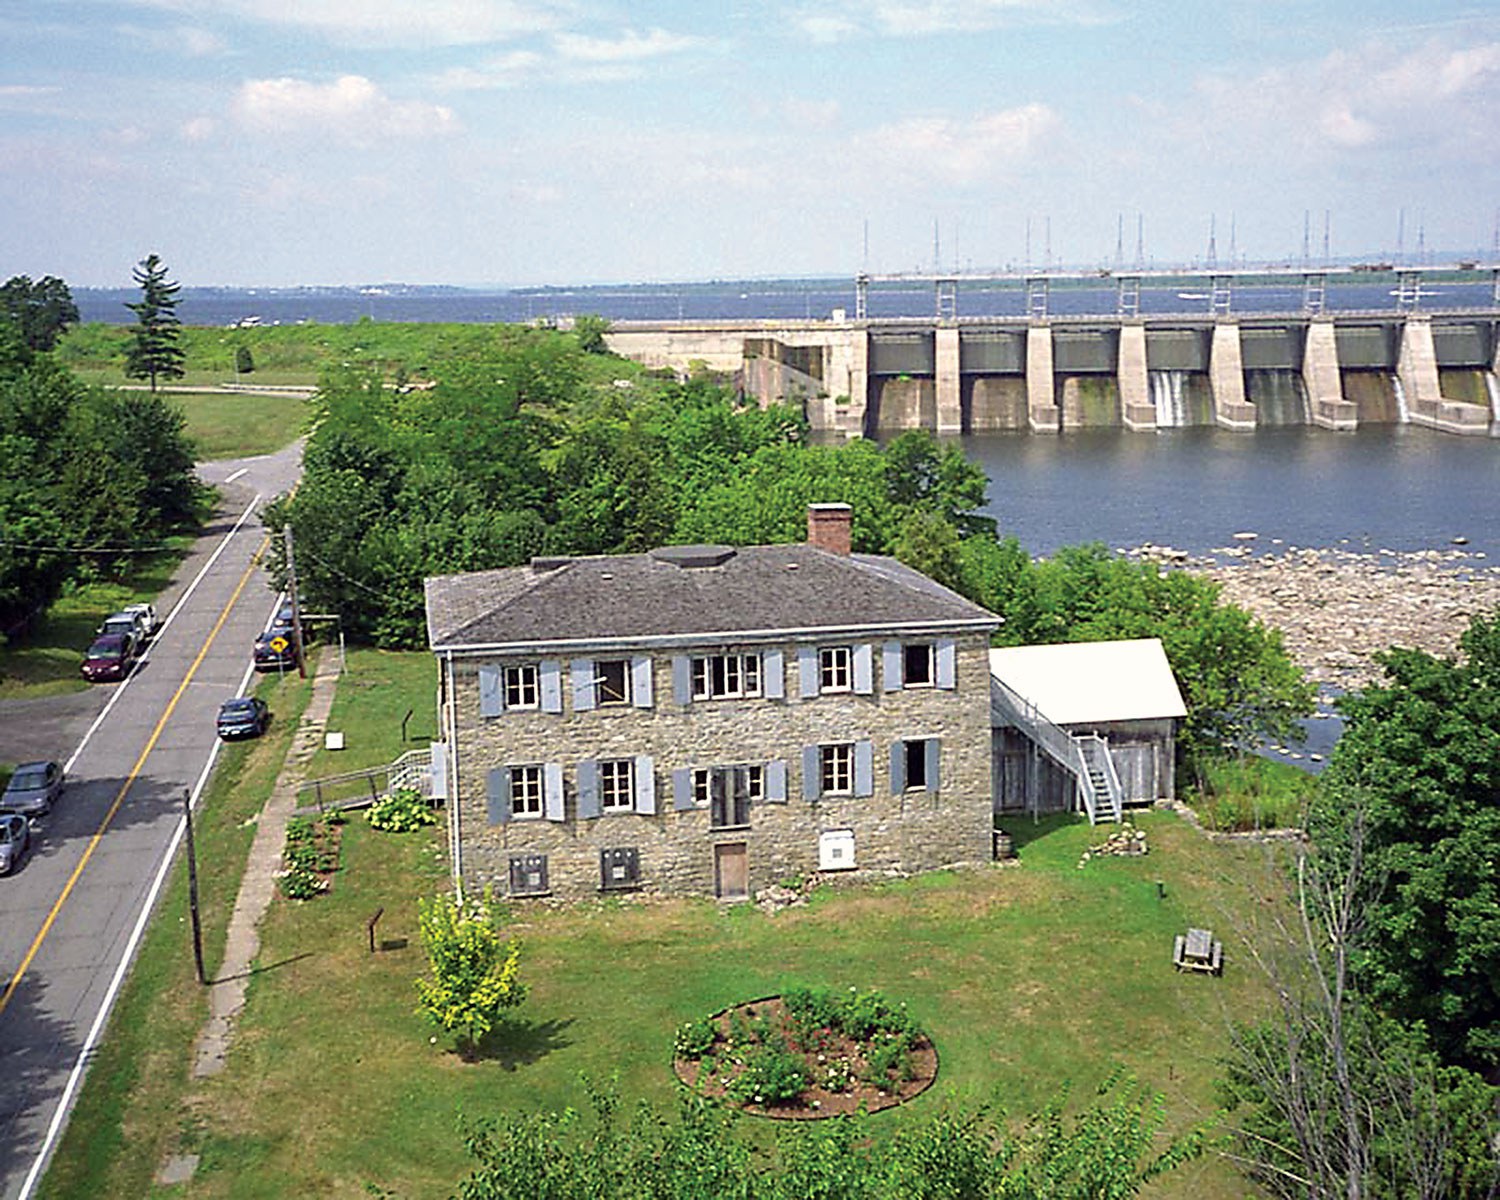 Aerial photograph of Macdonell-Williamson House with the Carillon Dam in the background (Photo: Carl Bigras)